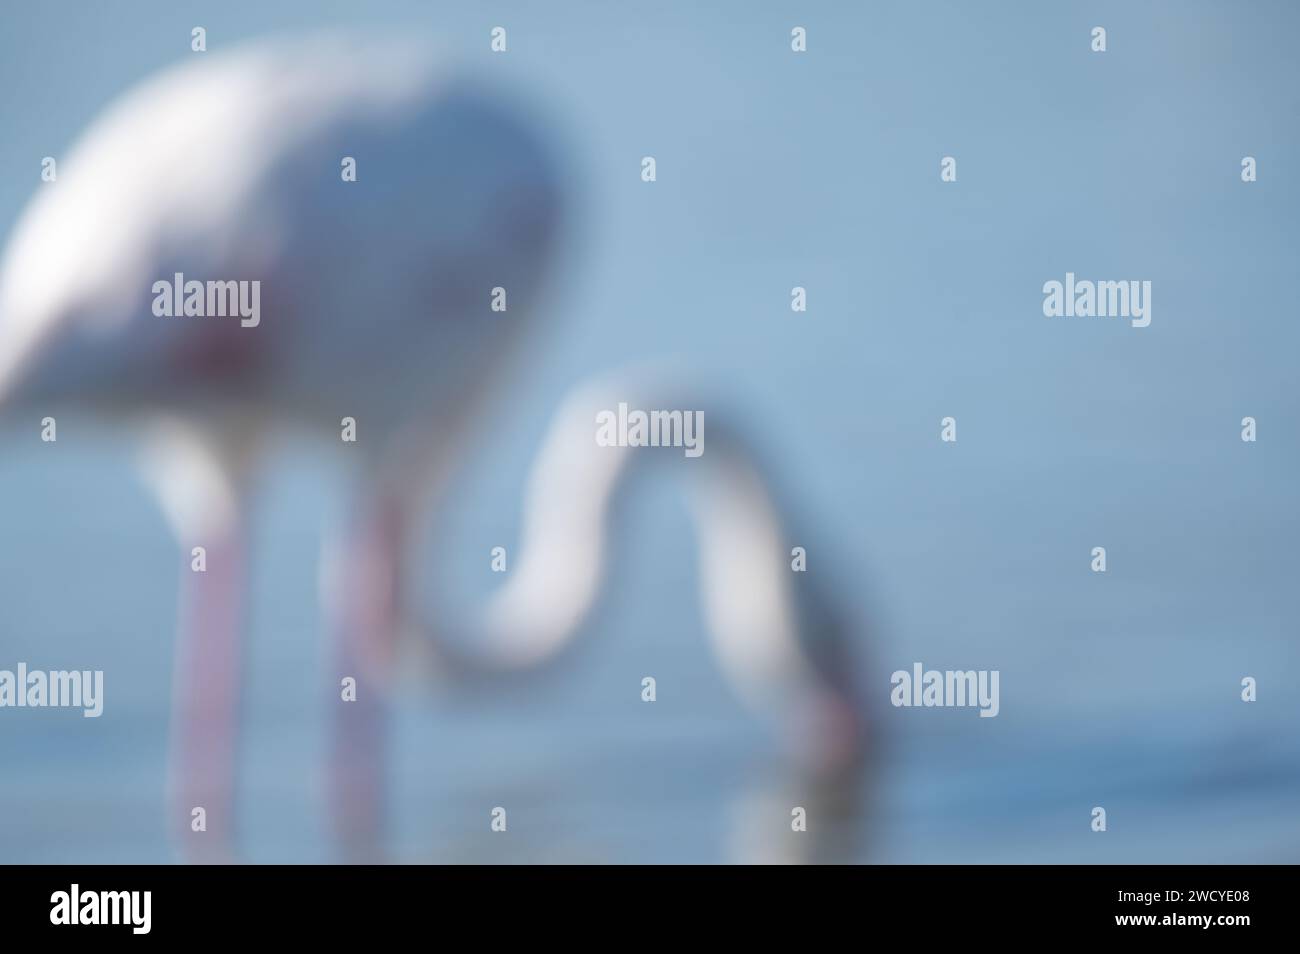 abstract portrait of a lesser flamingo Stock Photo